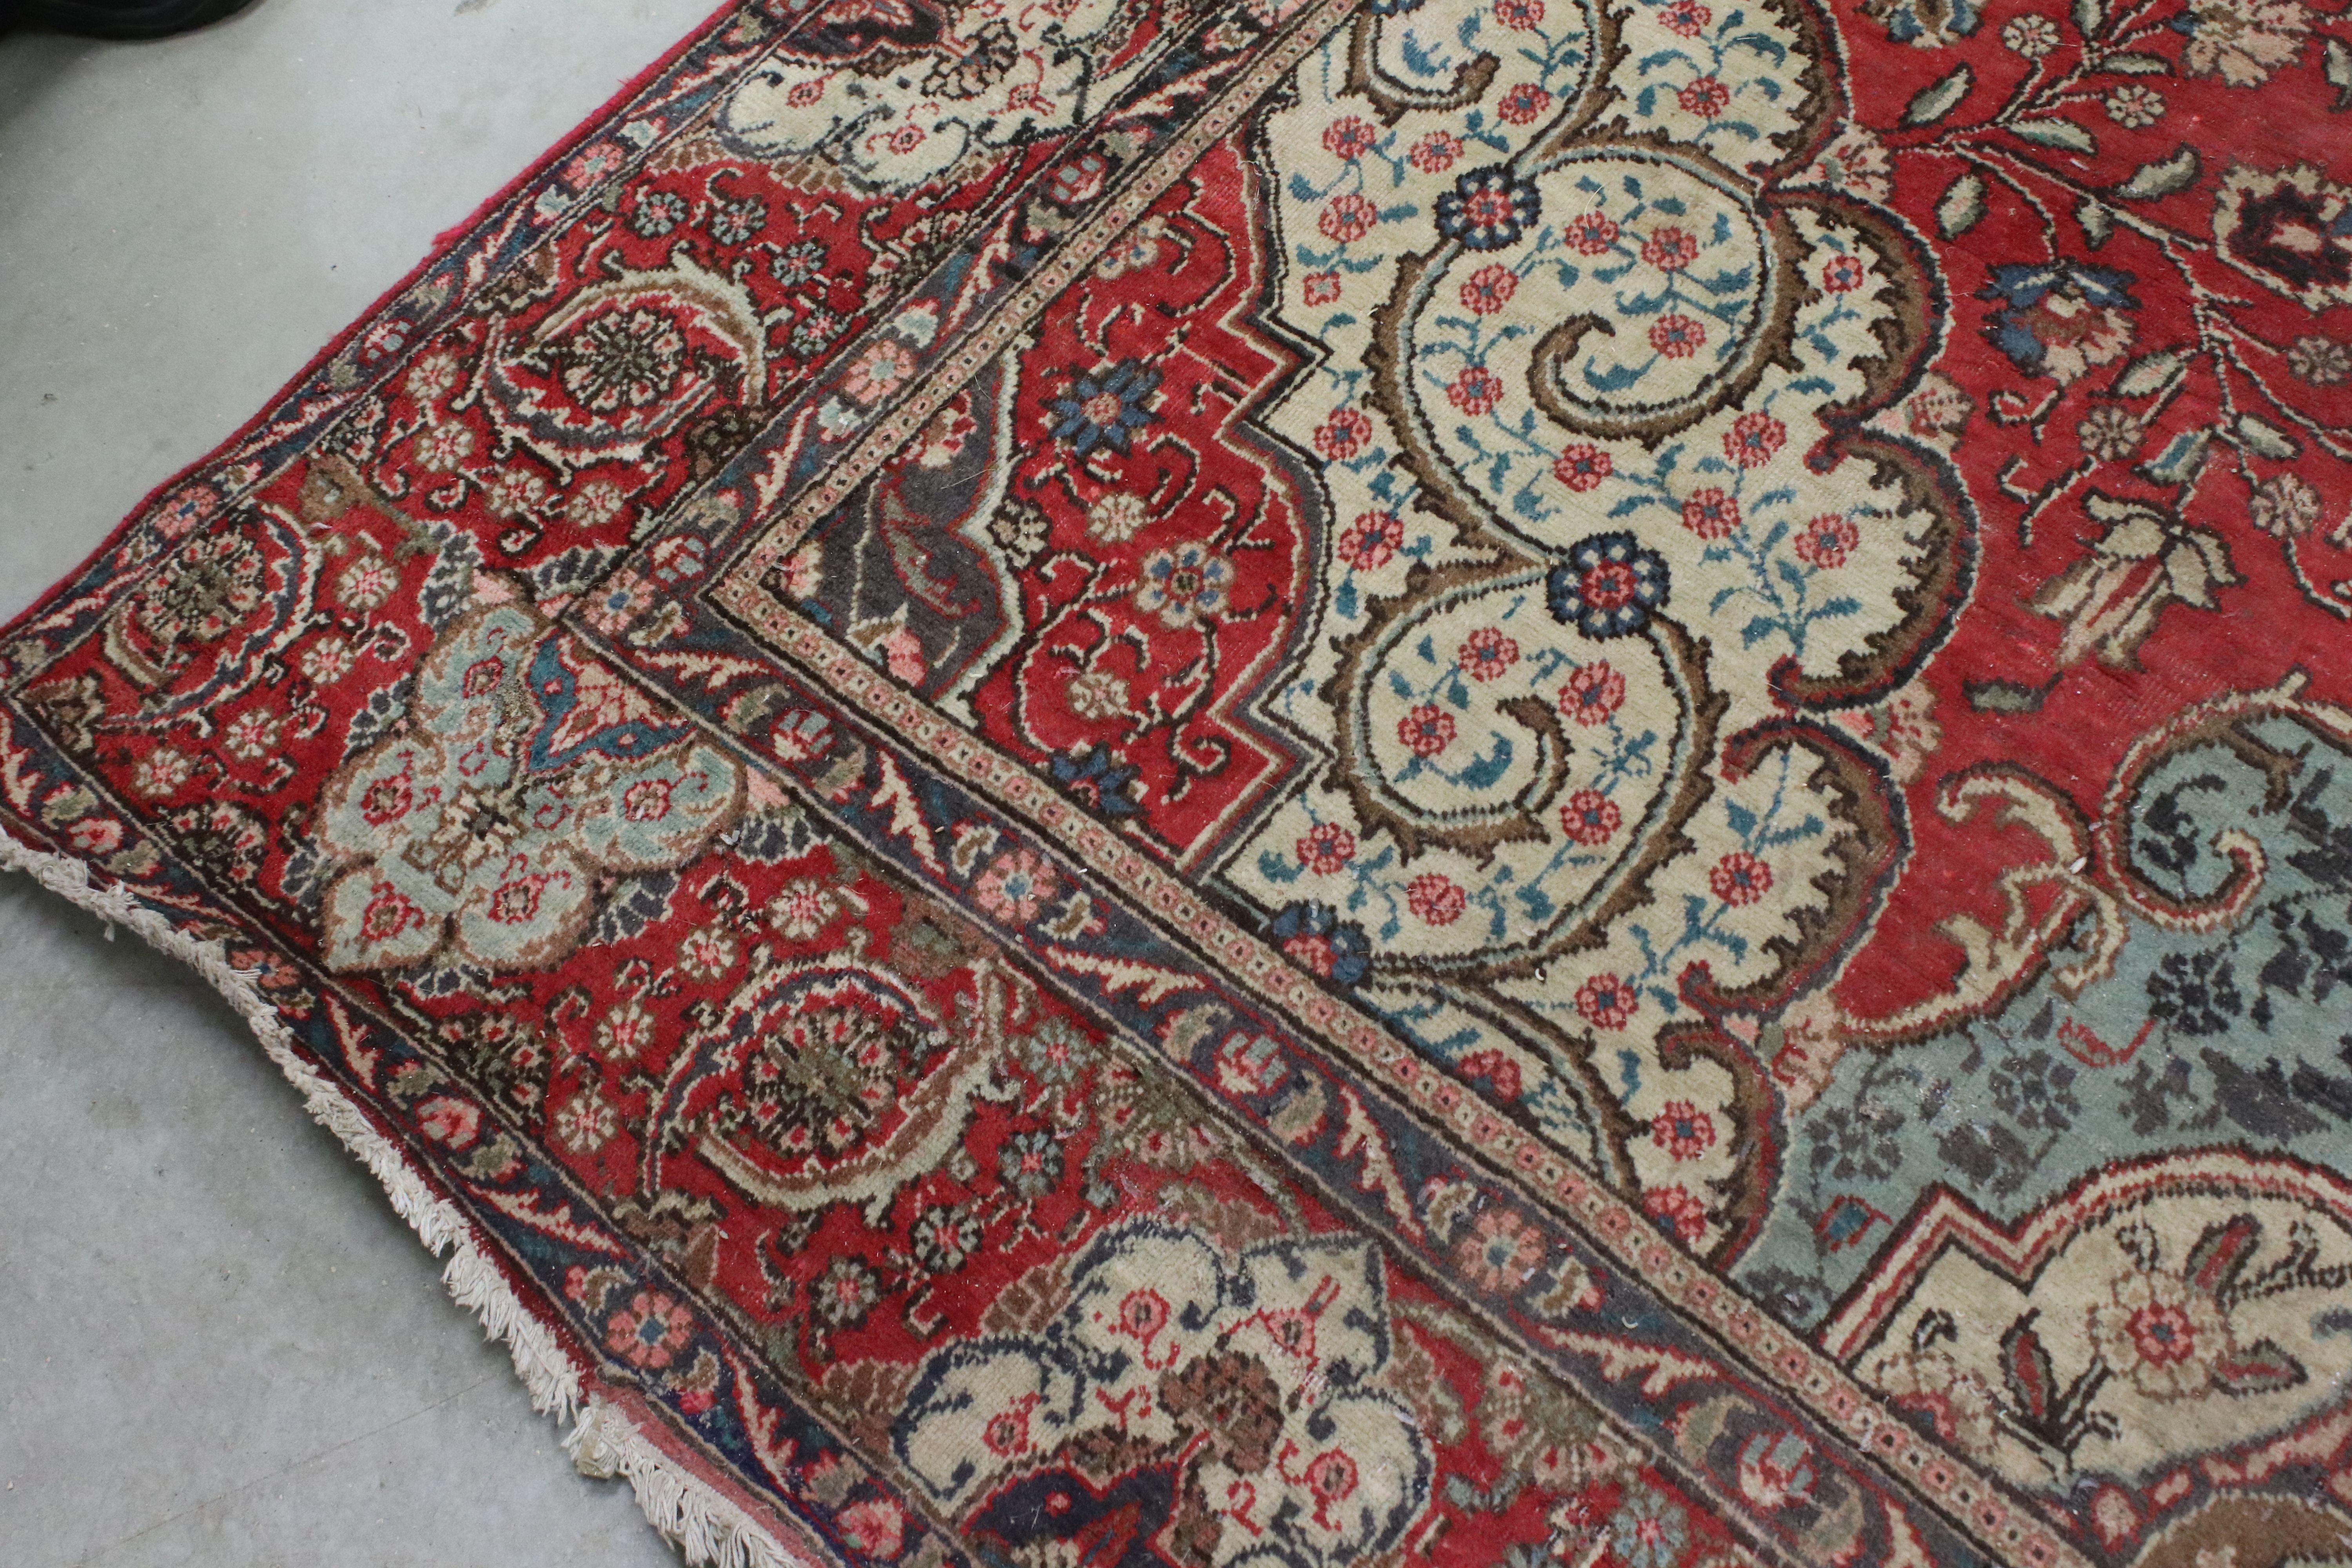 Large Wool Red Ground Rug with floral pattern within a border, 279cms x 396cms - Image 2 of 10